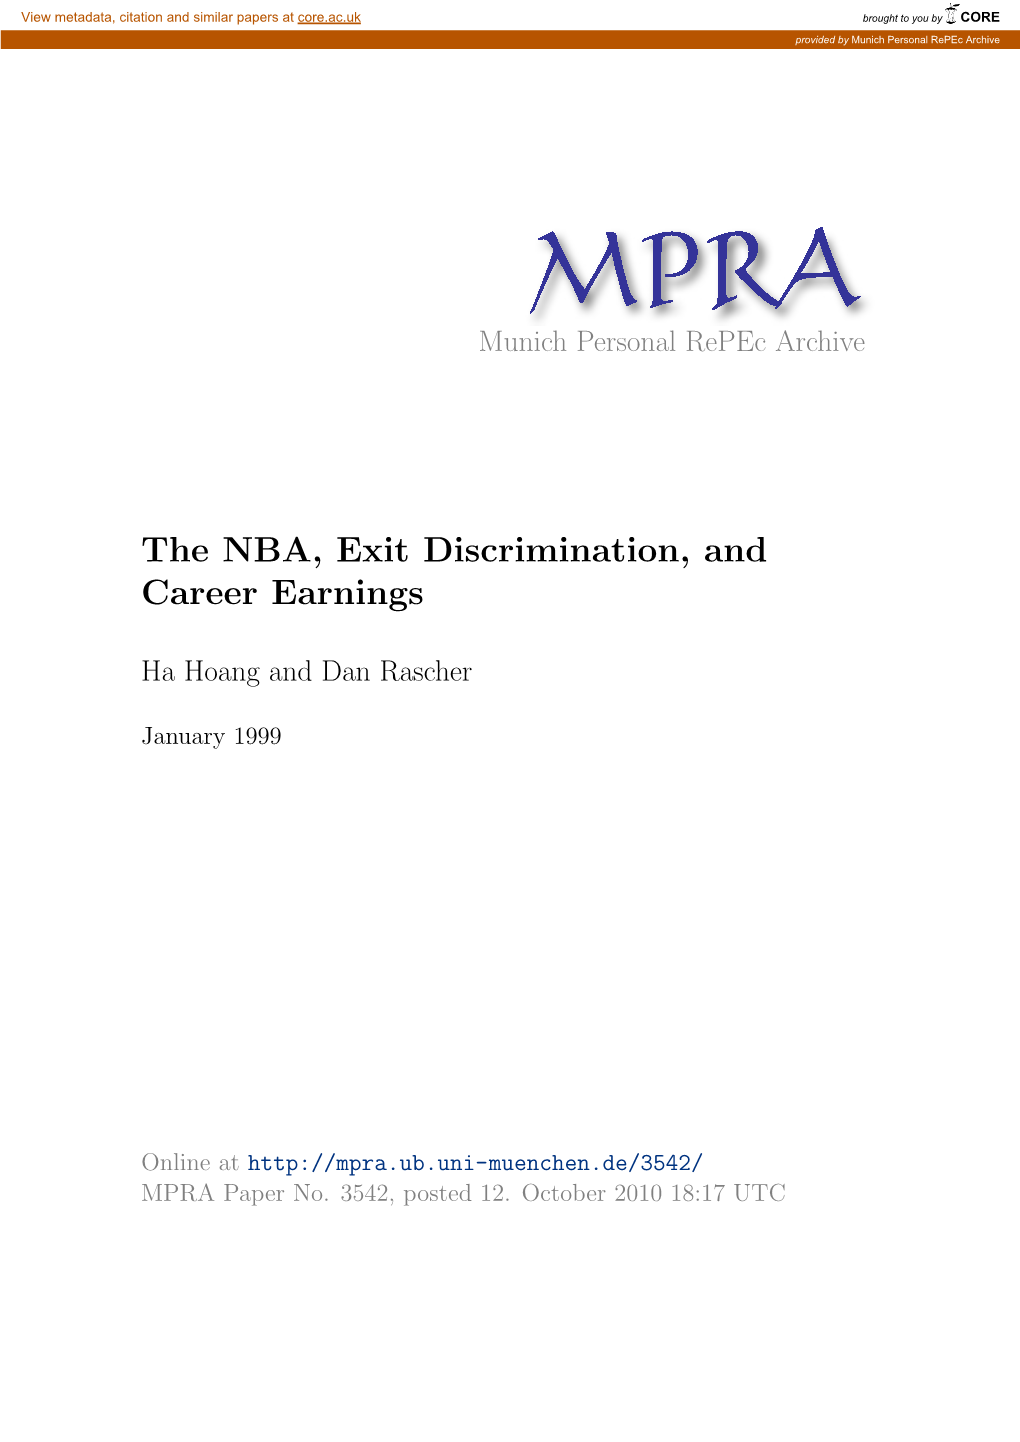 The NBA, Exit Discrimination, and Career Earnings